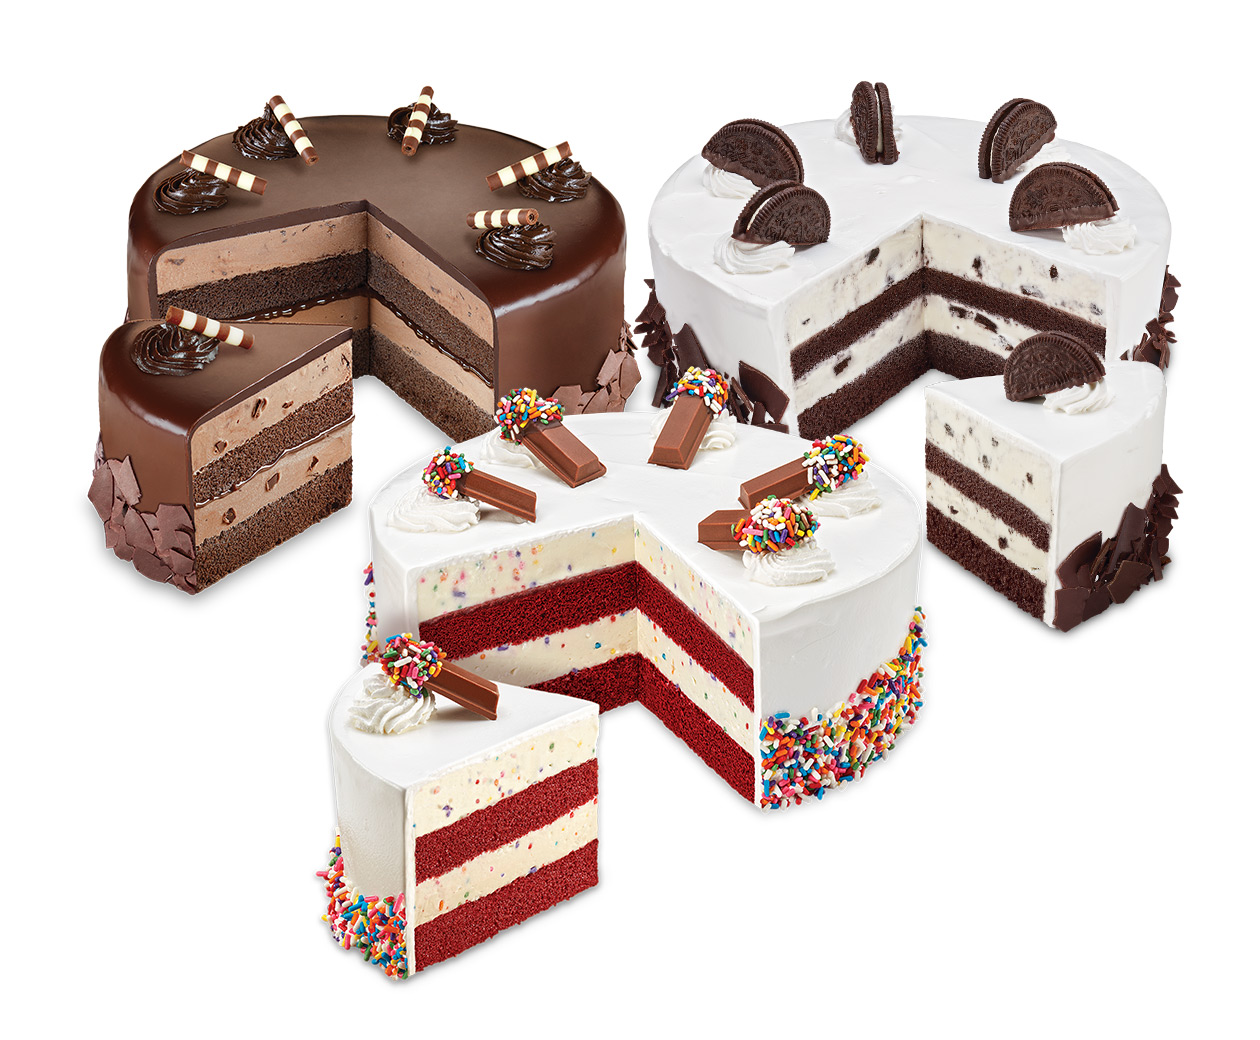 Cakes made with your favorite Ice Cream at Cold Stone Creamery